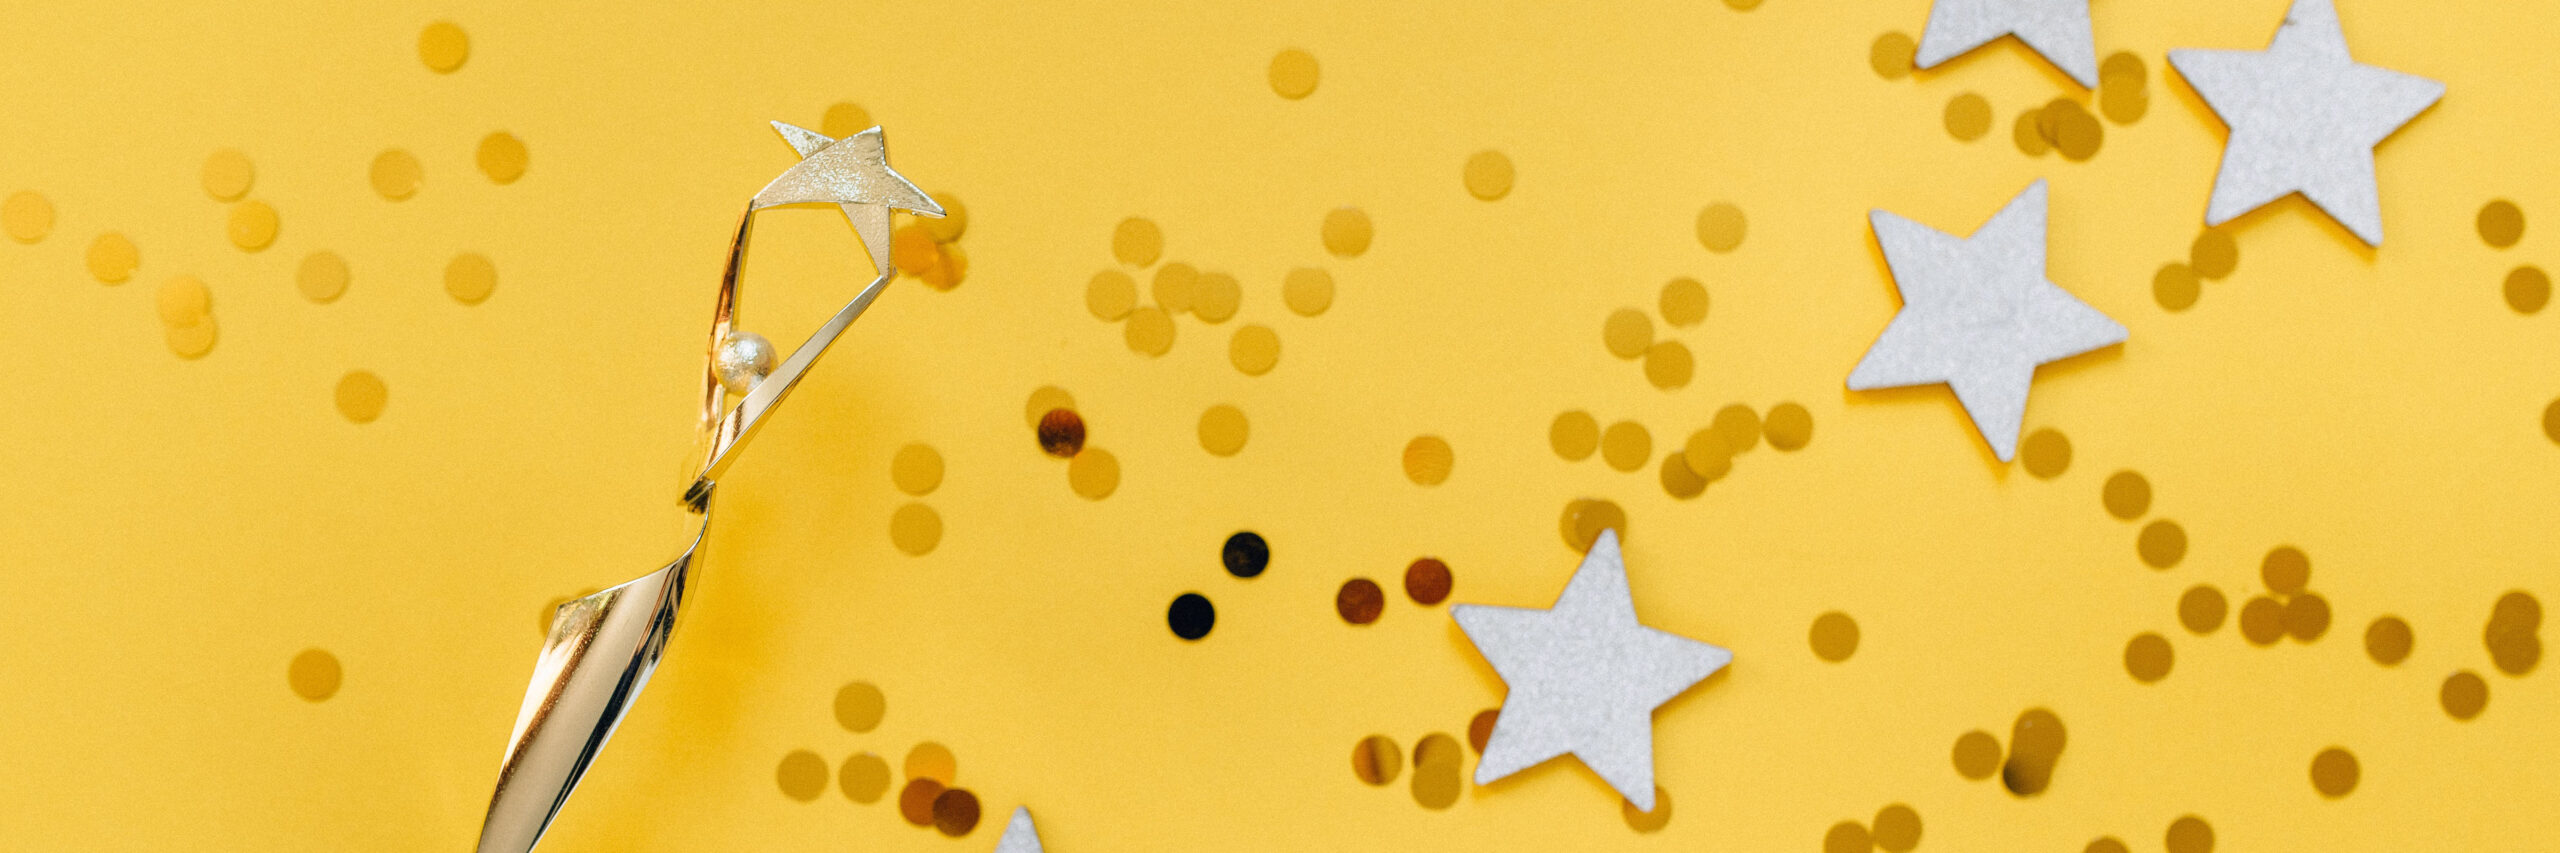 Gold trophy, stars and confetti on a yellow background